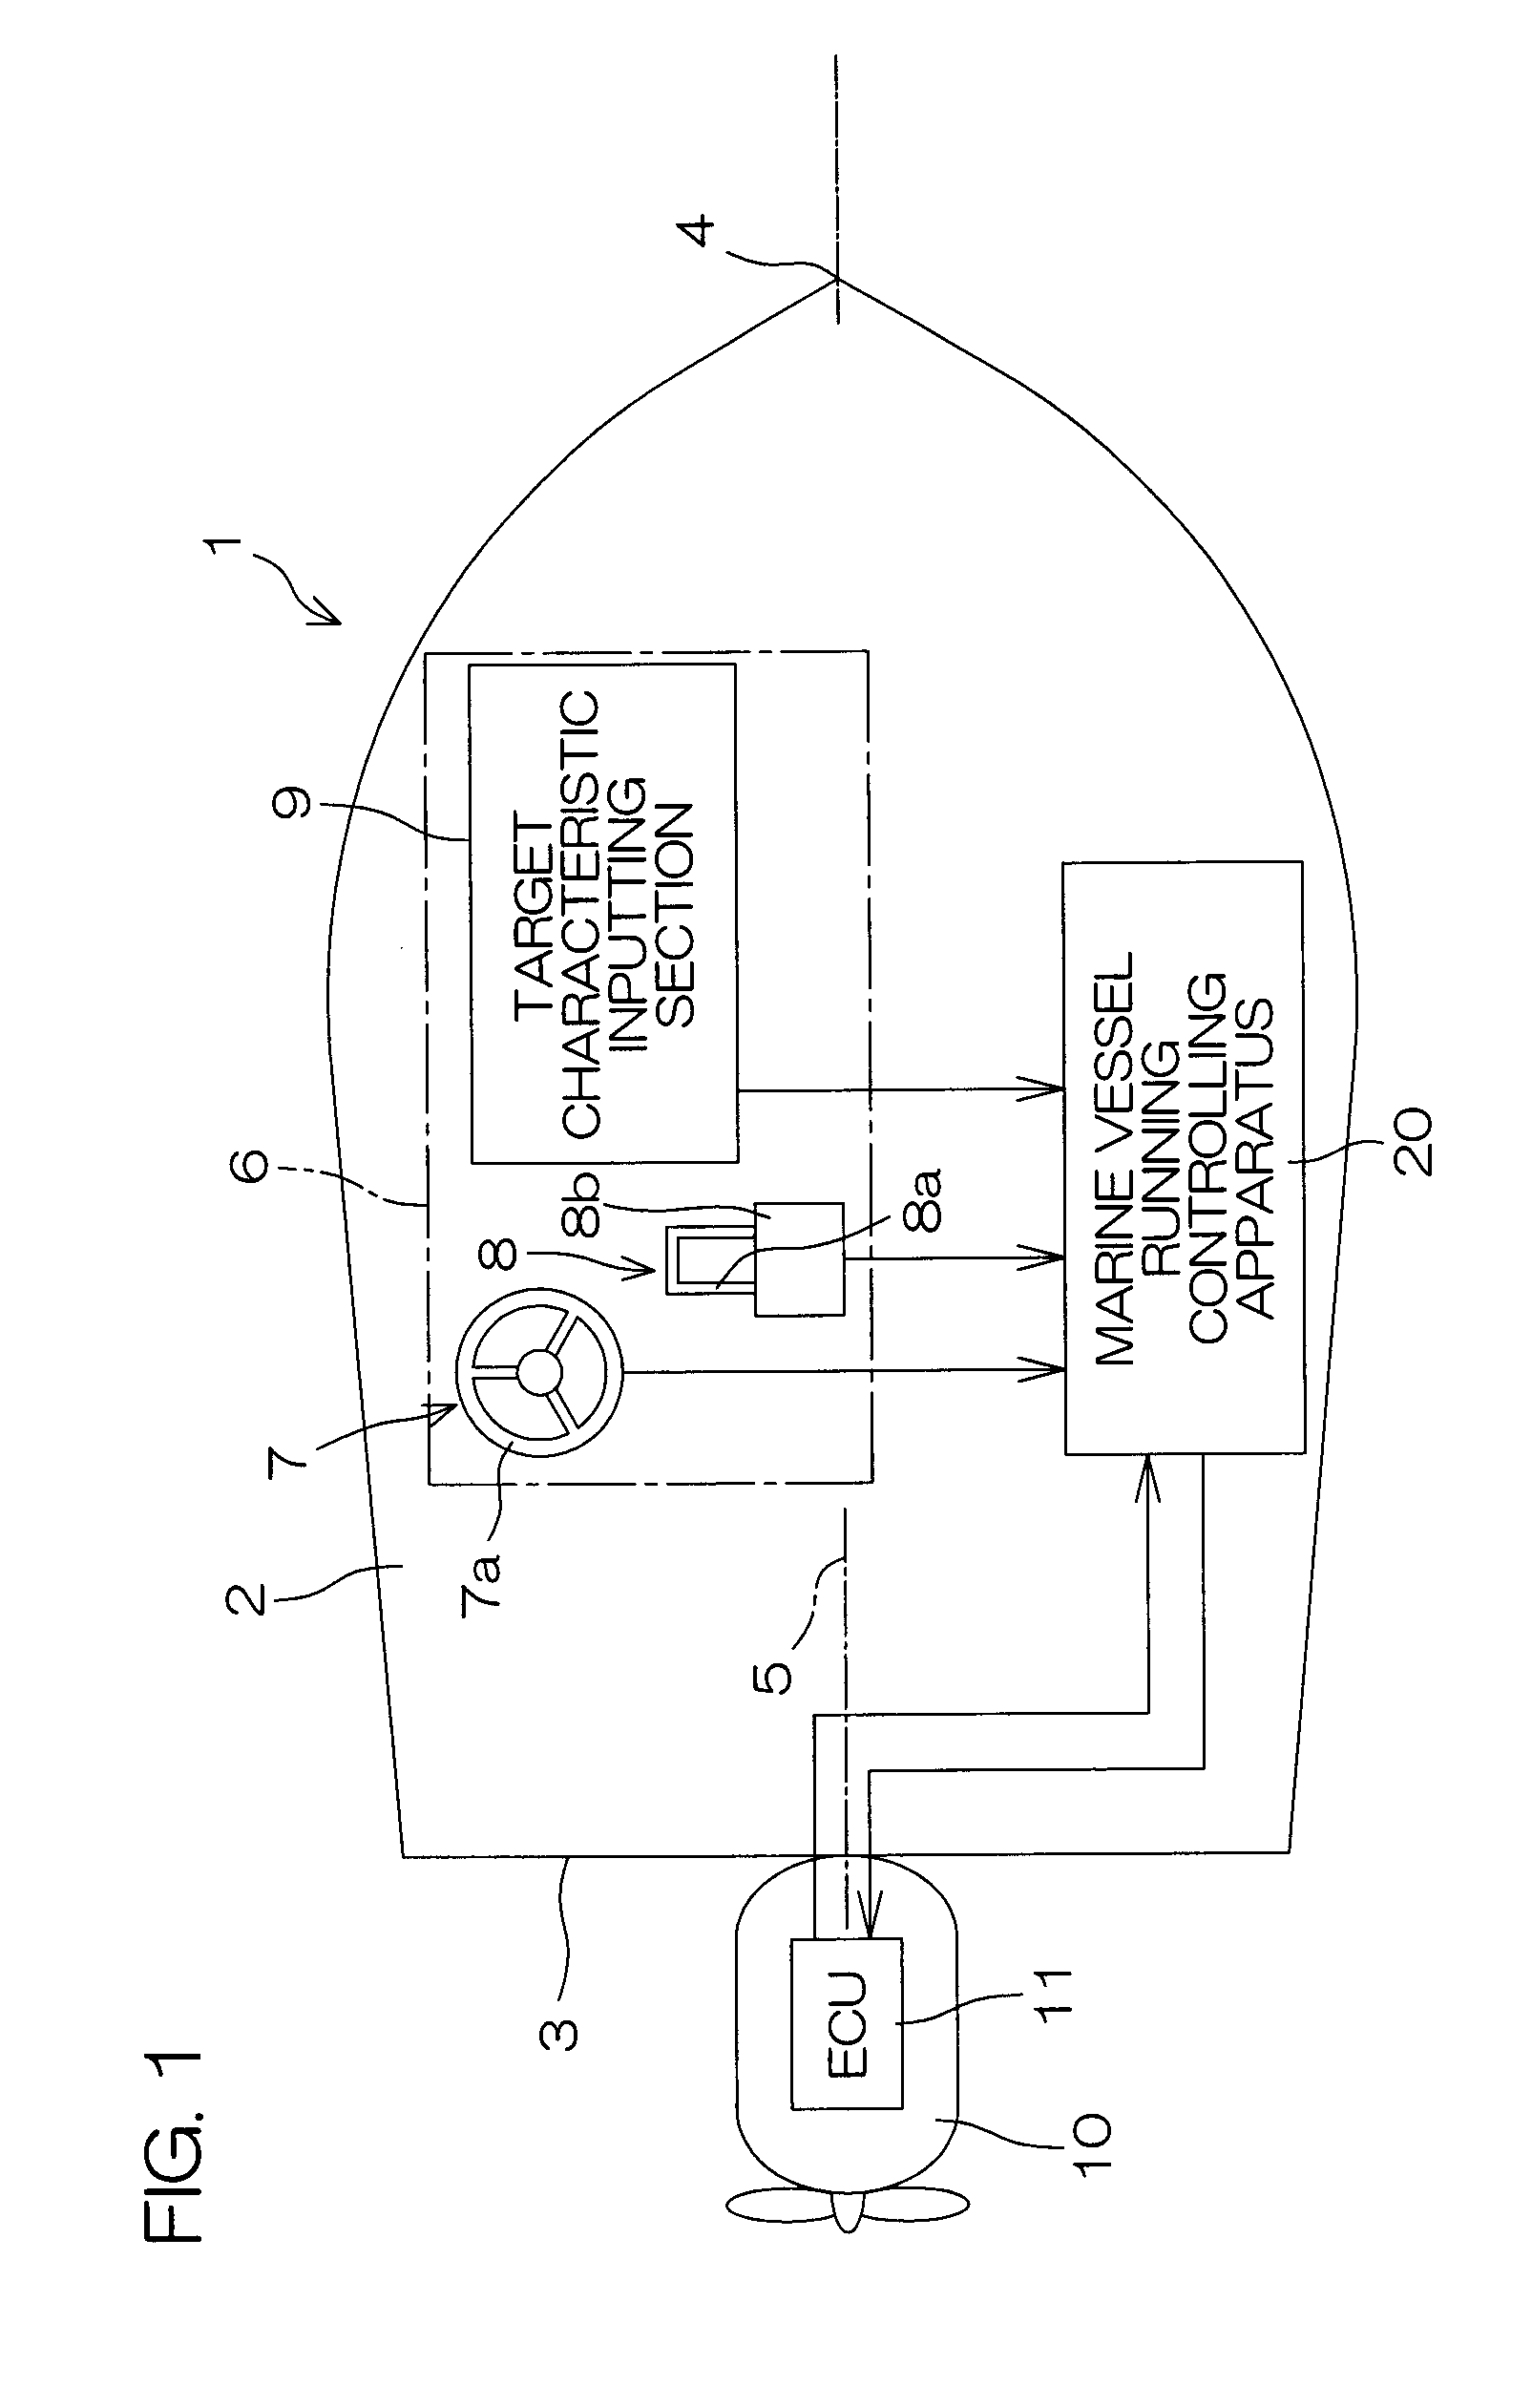 Marine vessel running controlling apparatus, and marine vessel including the same